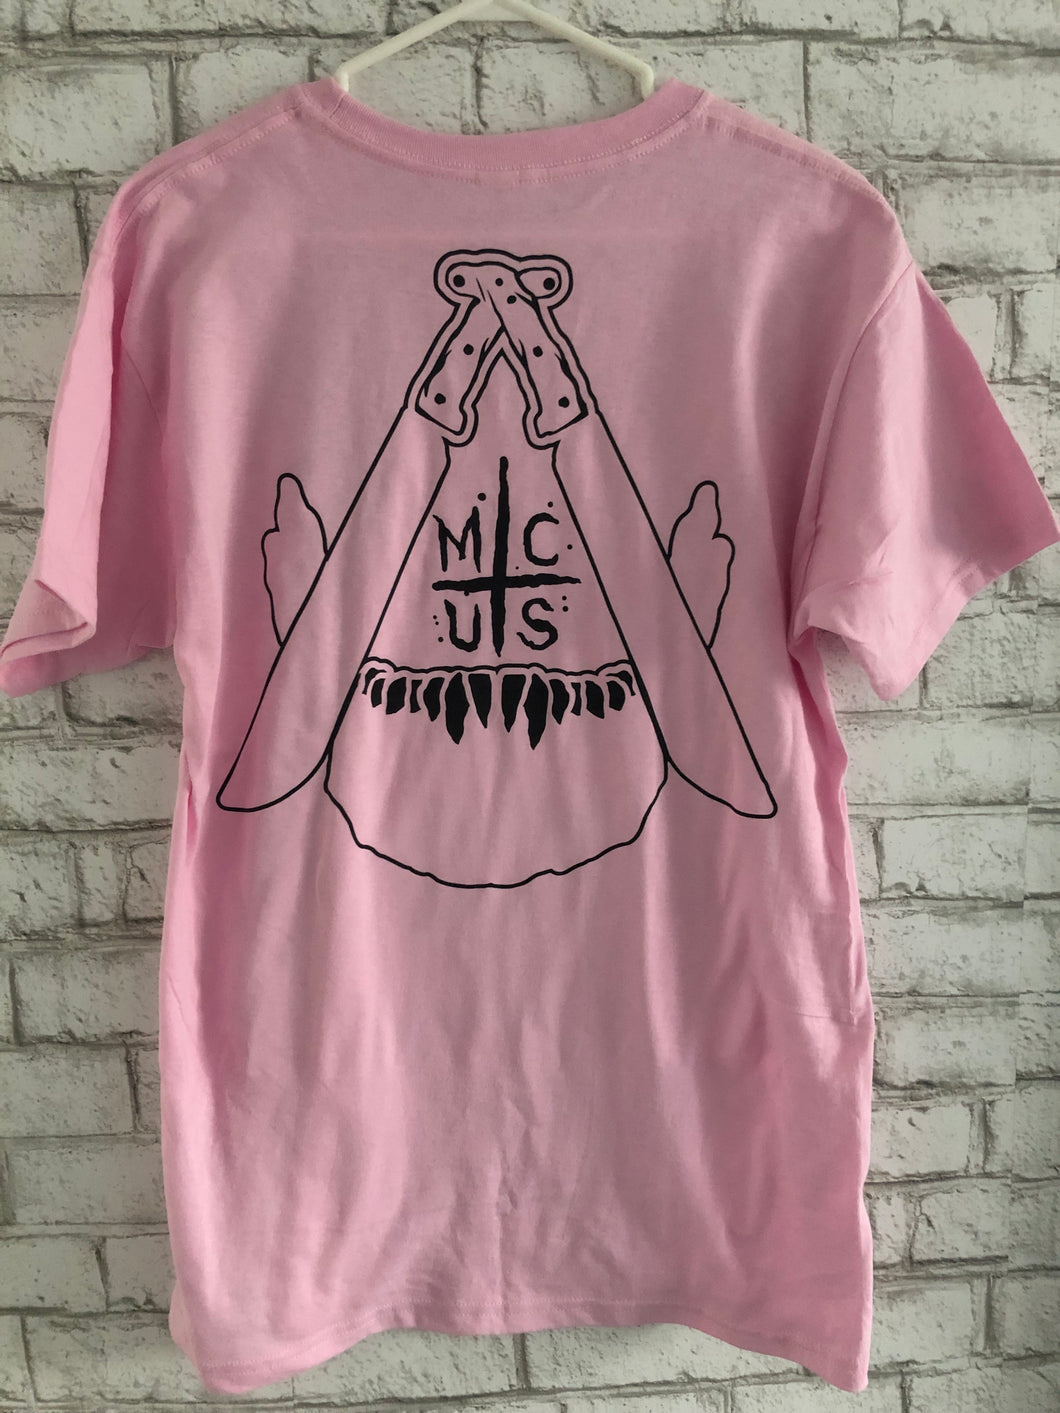 Architects of void tee pink